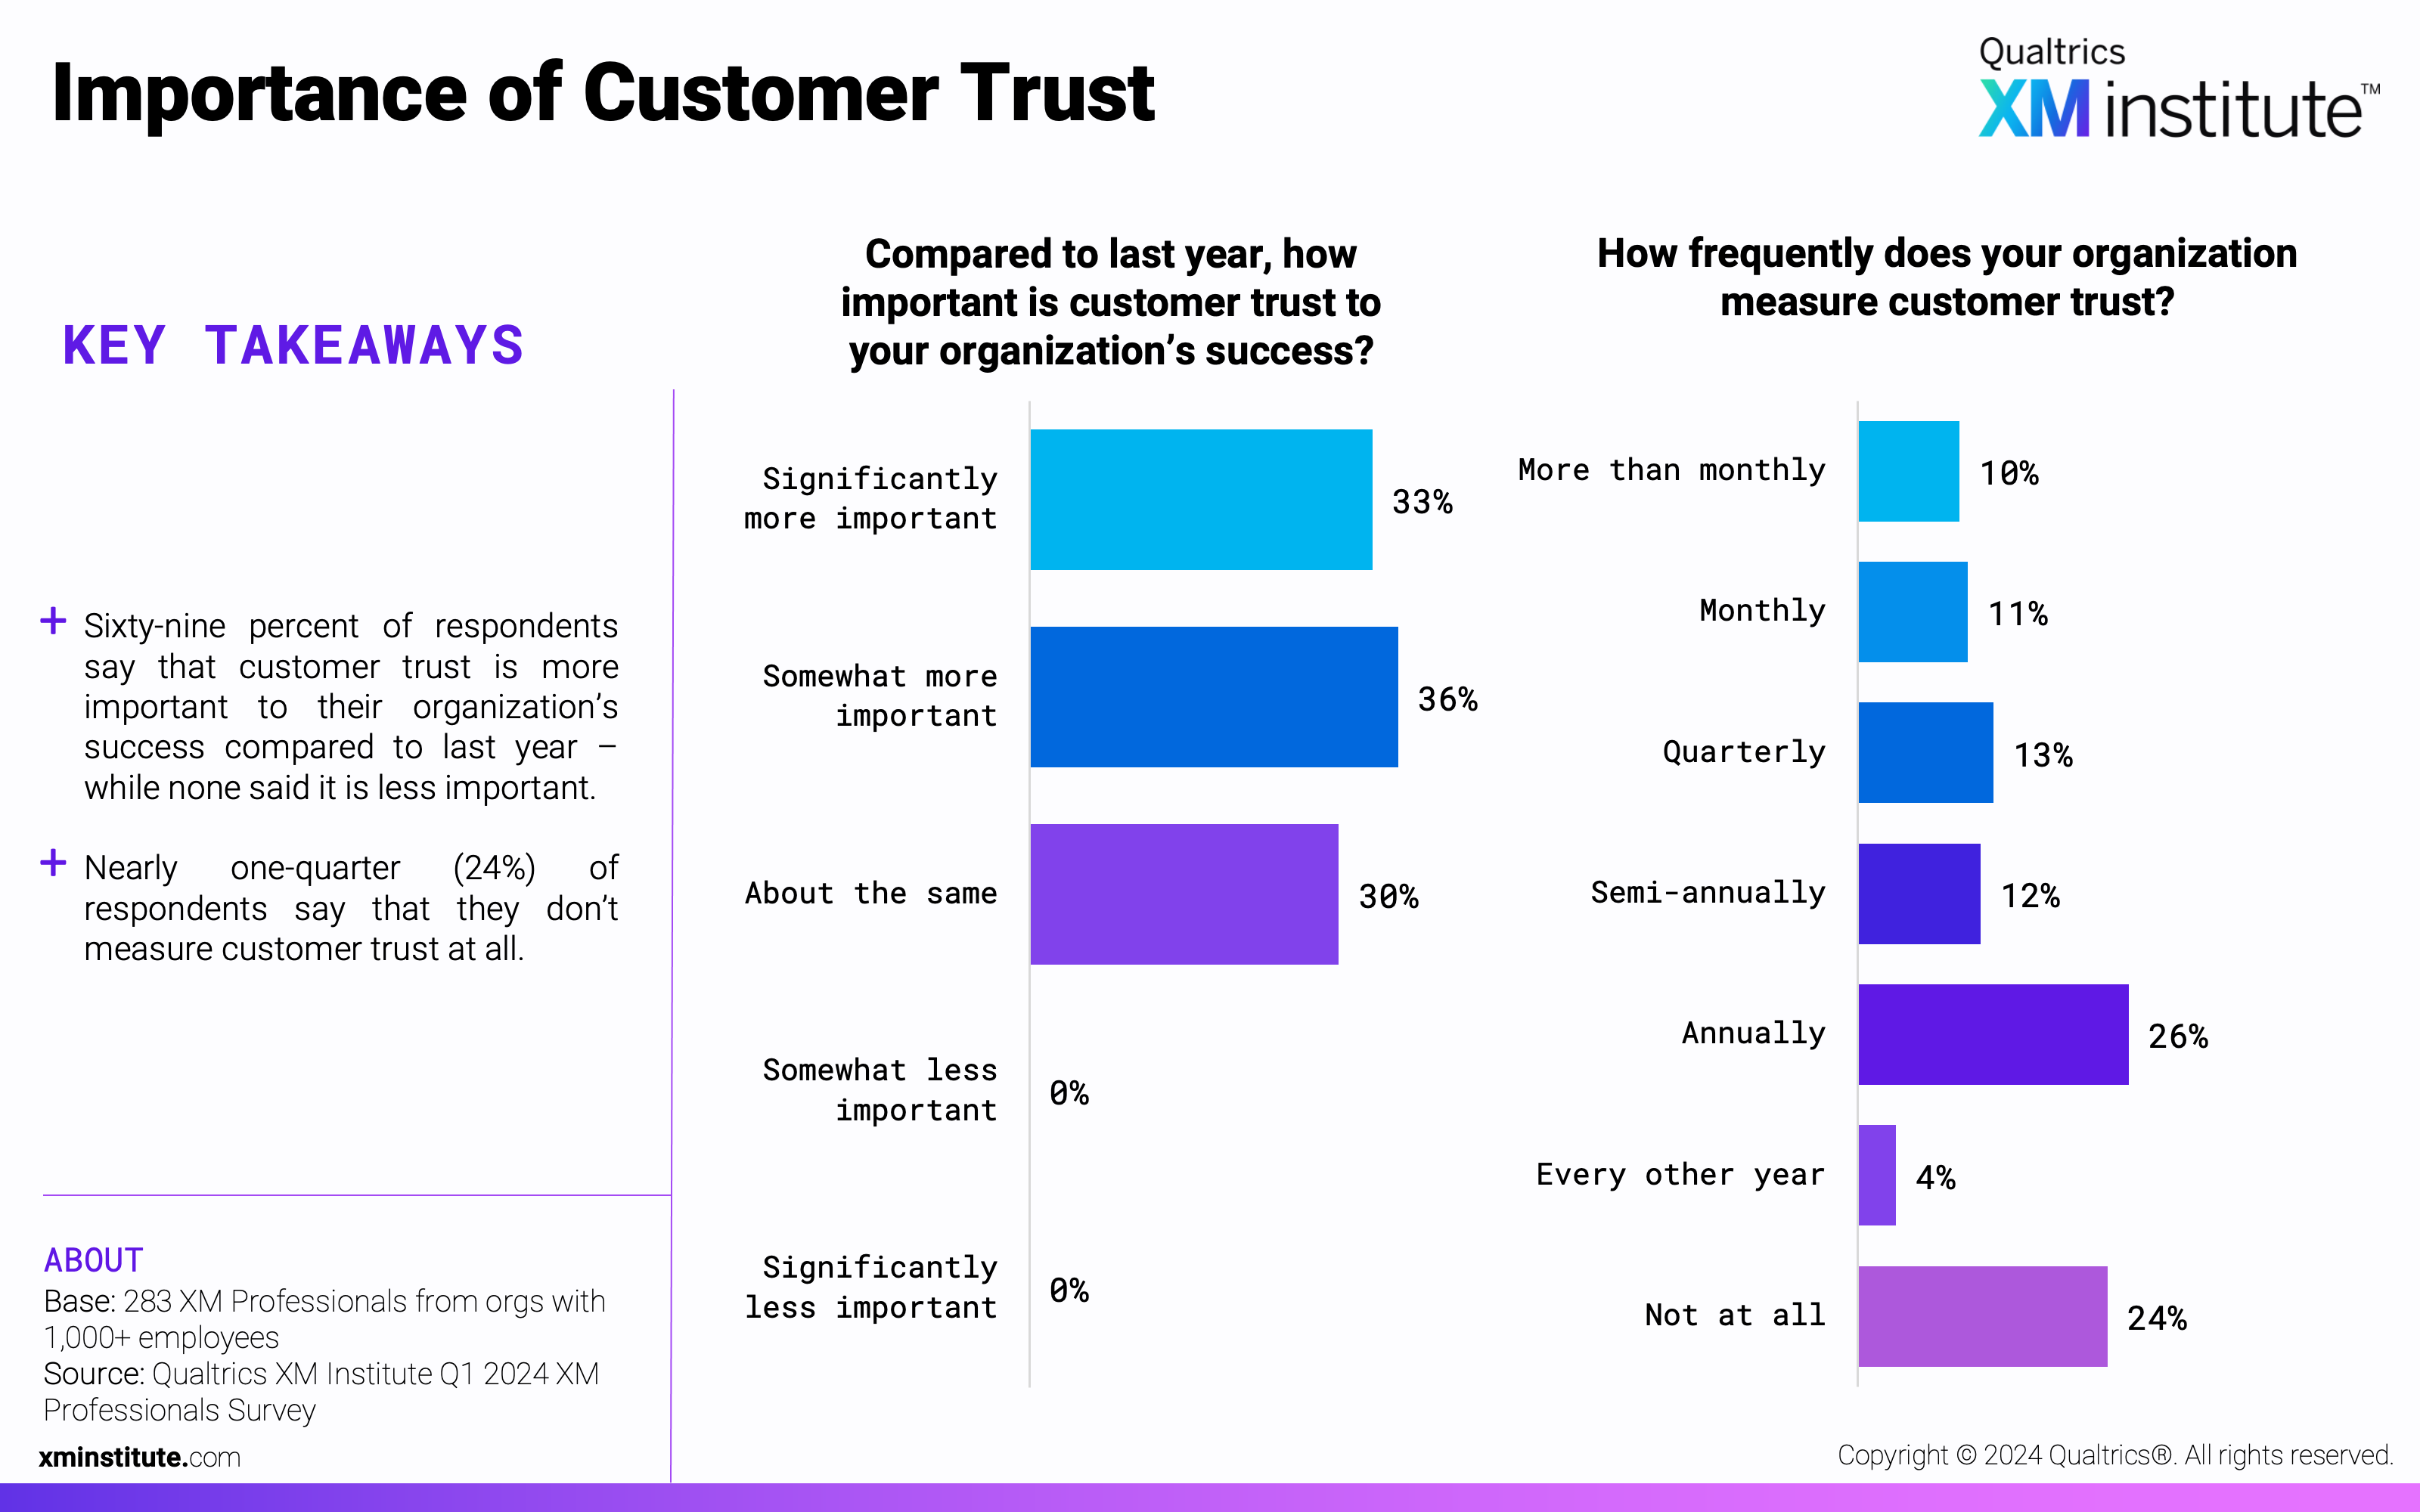 These charts show how much more important customer trust is to respondents' organizations' success, and how frequently they measure customer trust. 